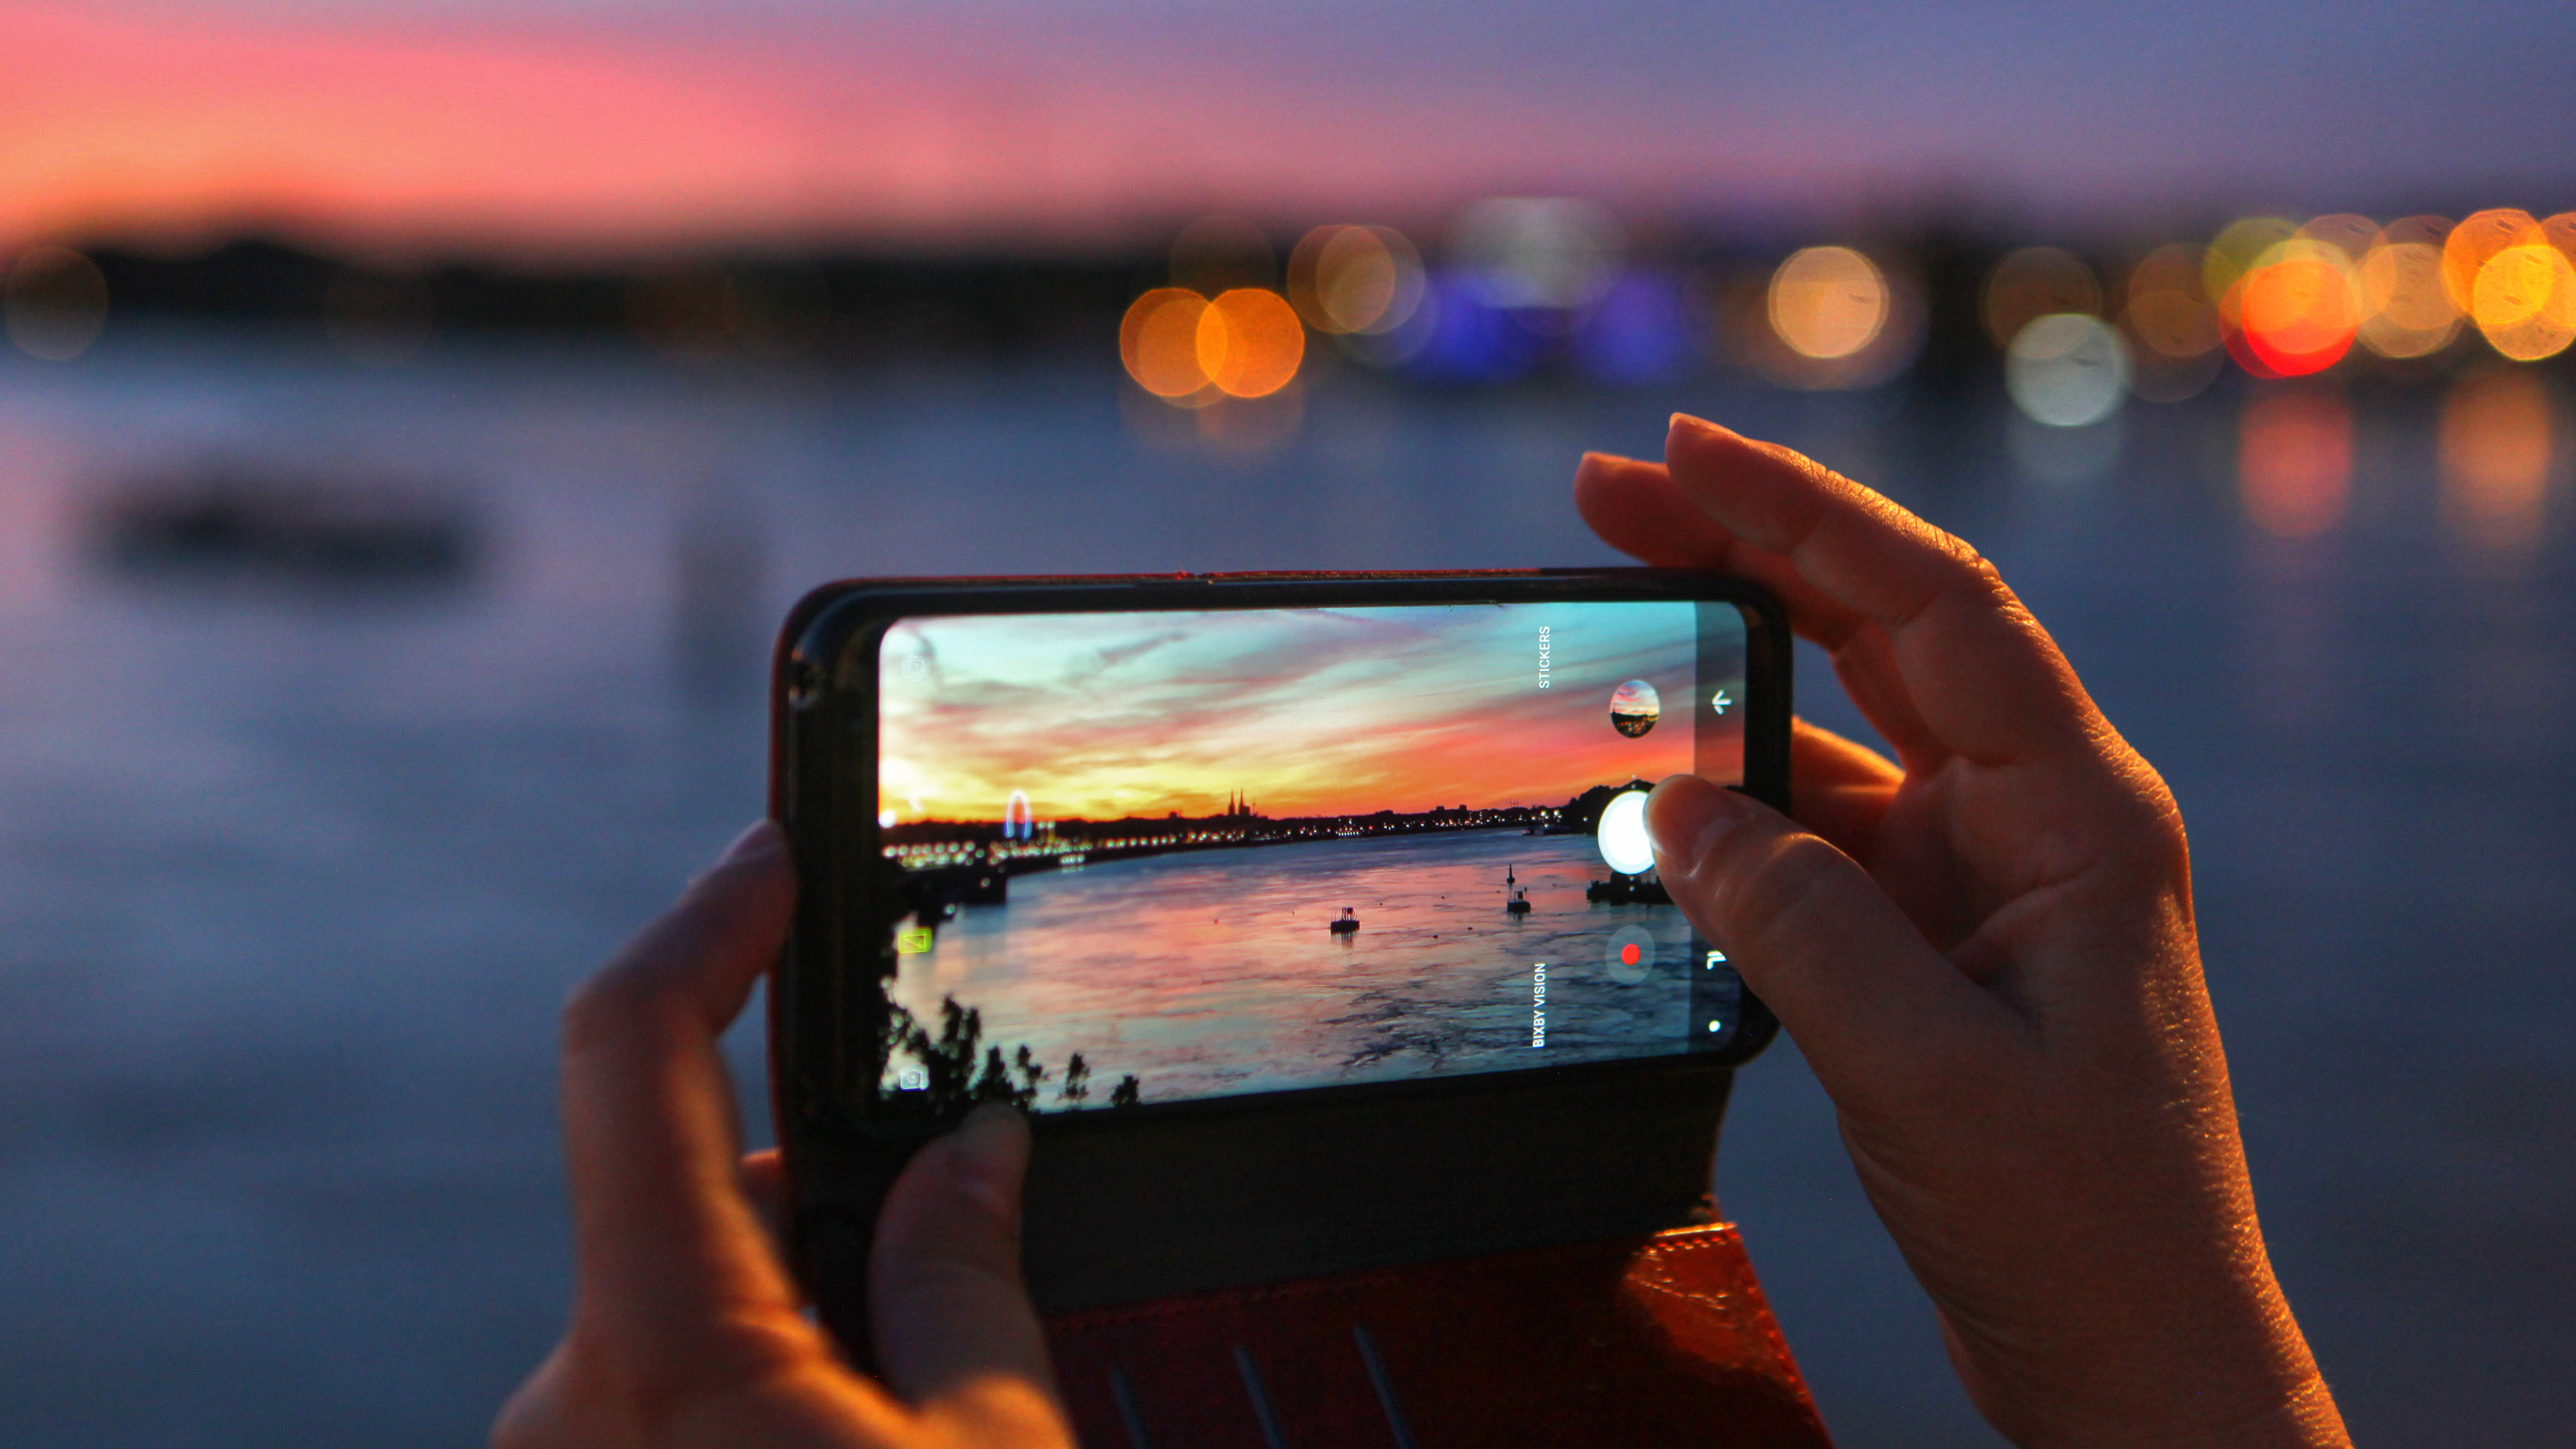 A person is holding a smartphone in their hand and using the camera to take a picture of a sunset over a river. The smartphone is being held steady with both hands to prevent camera shake.